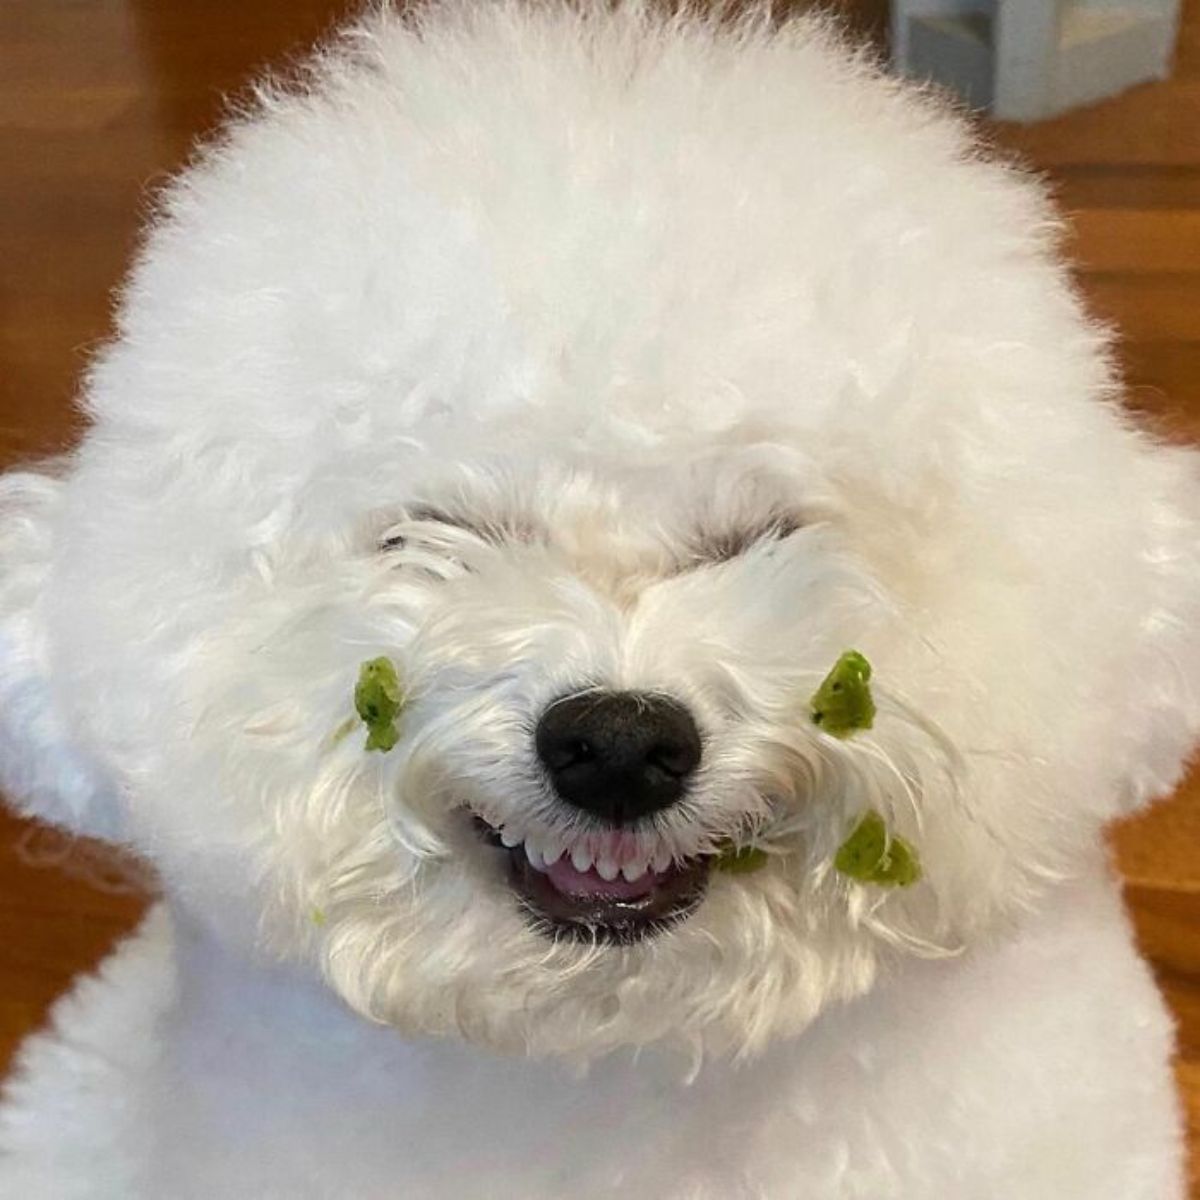 small fluffy white dog has mouth open with bits of green food stuck around the mouth